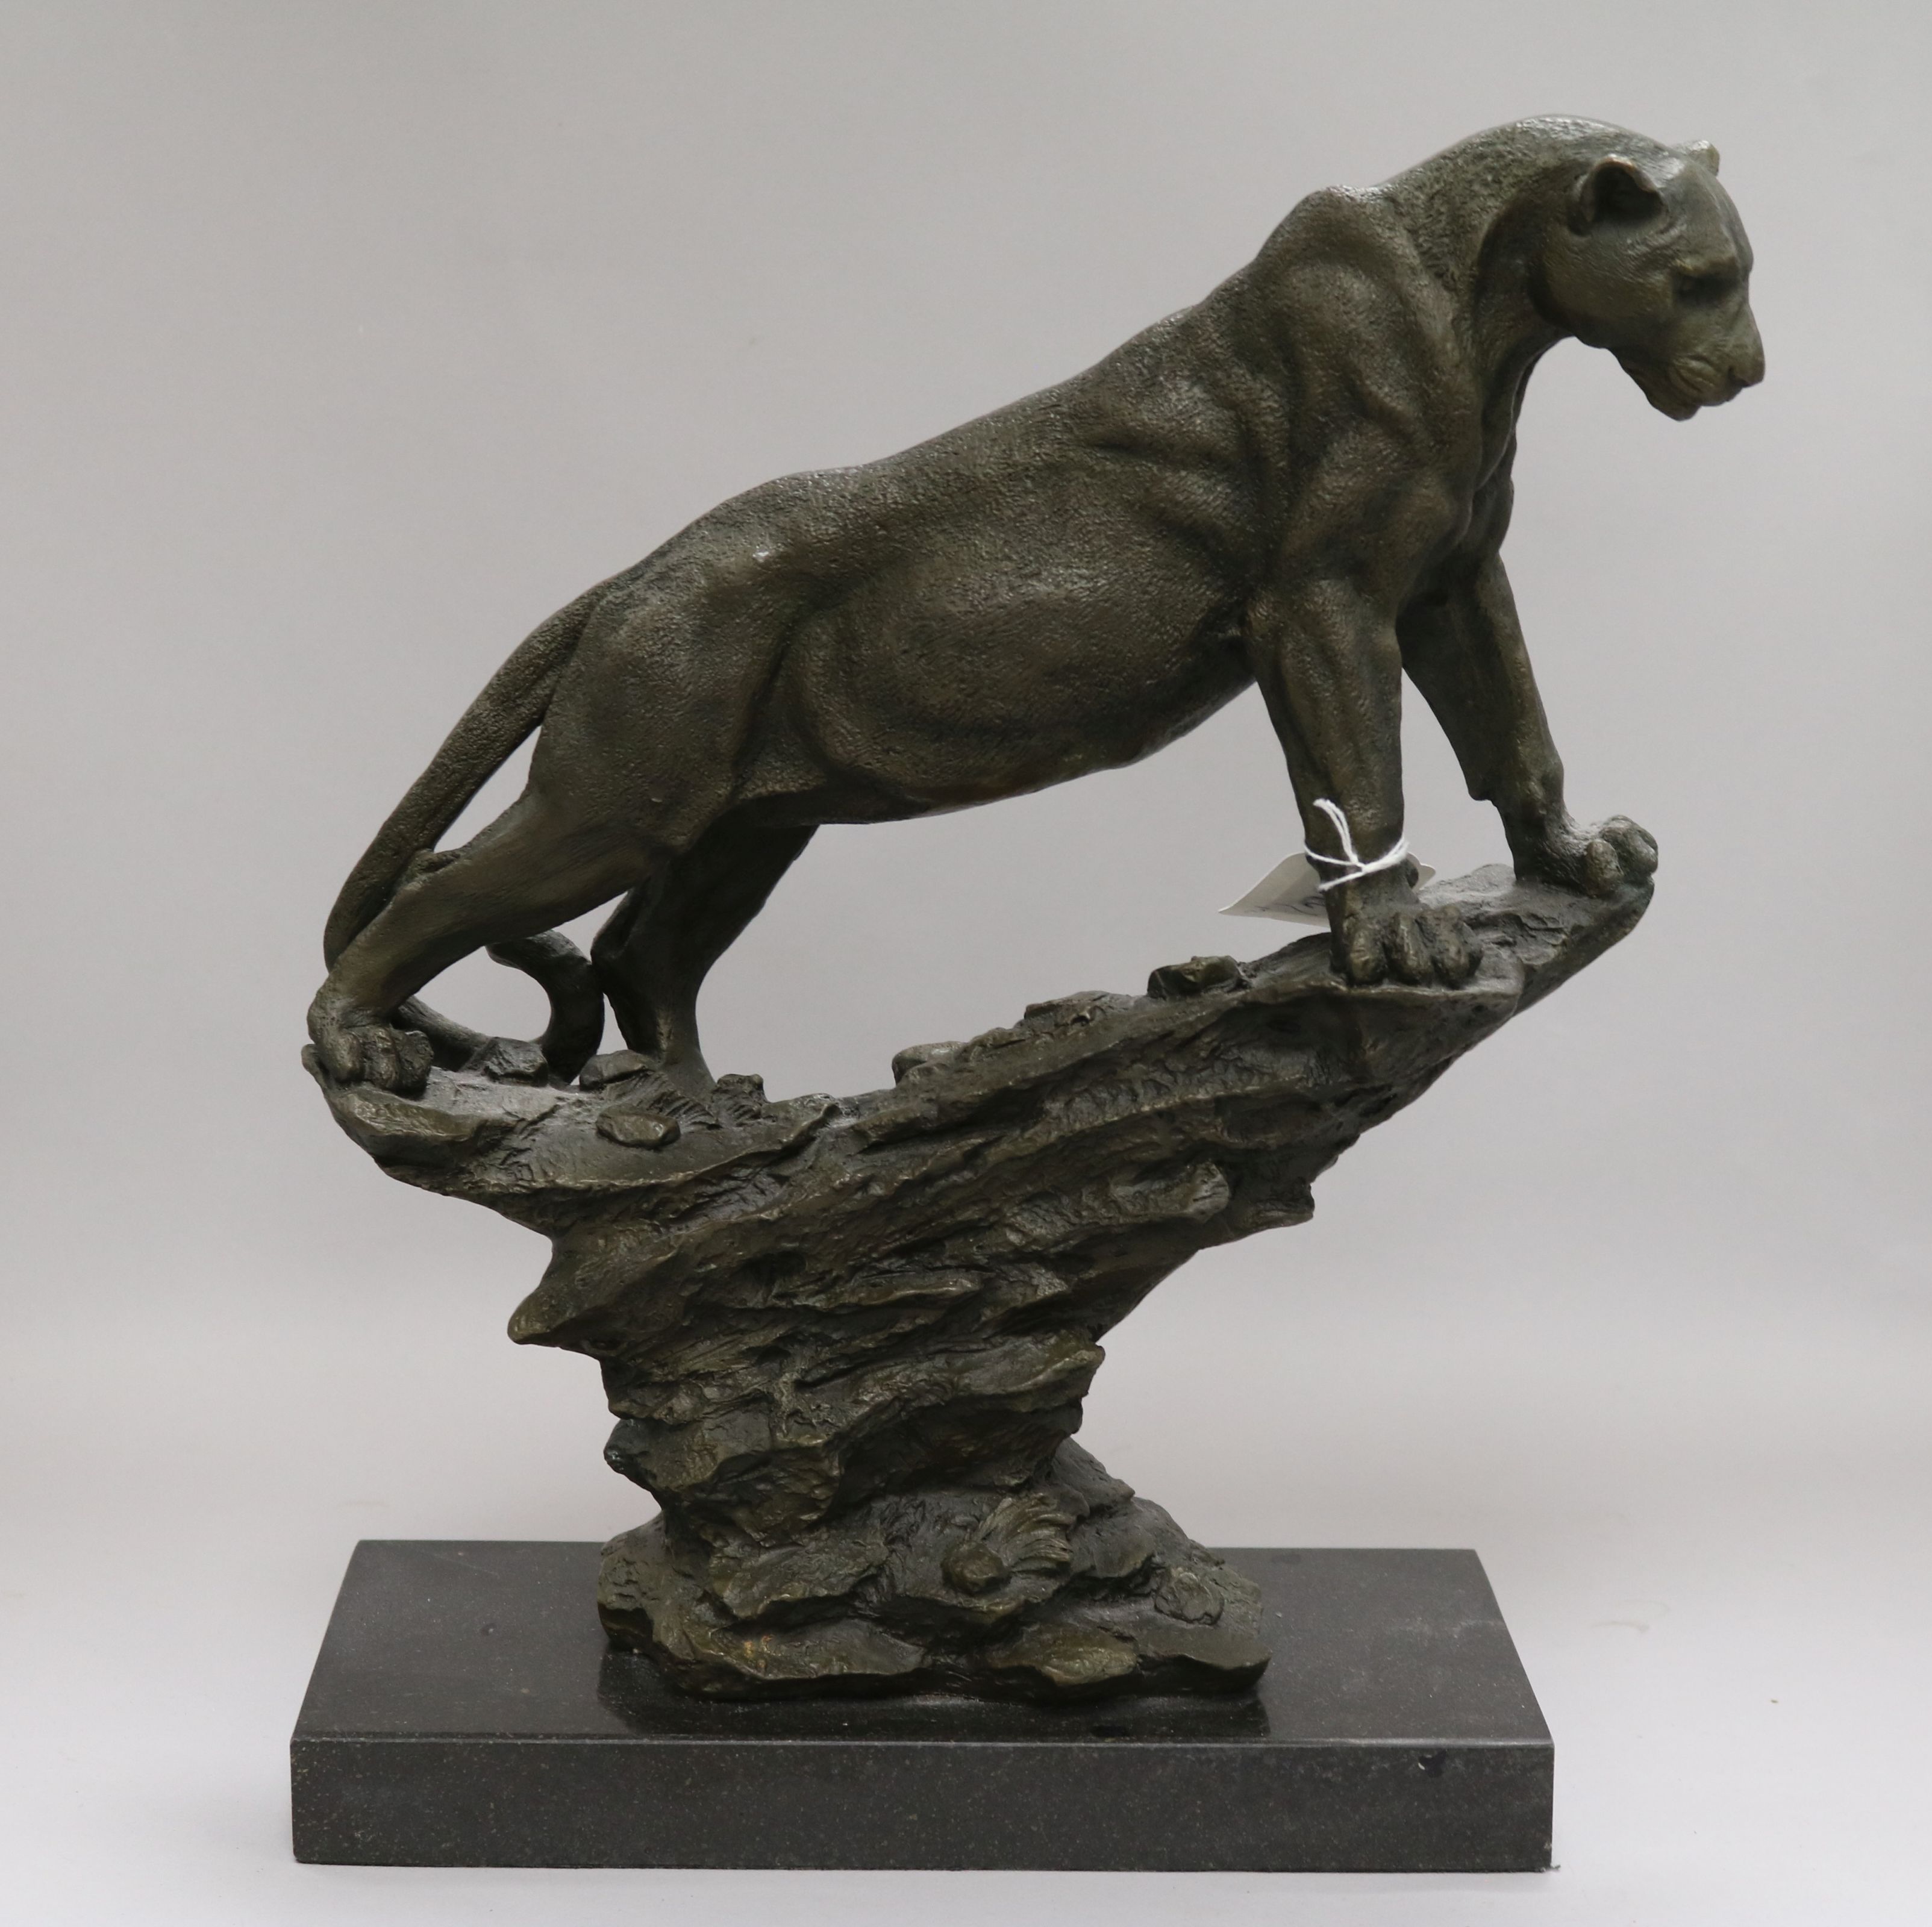 A bronze model of a mountain lion signed Pougatti by Talos Gallery on marble base height 39cm